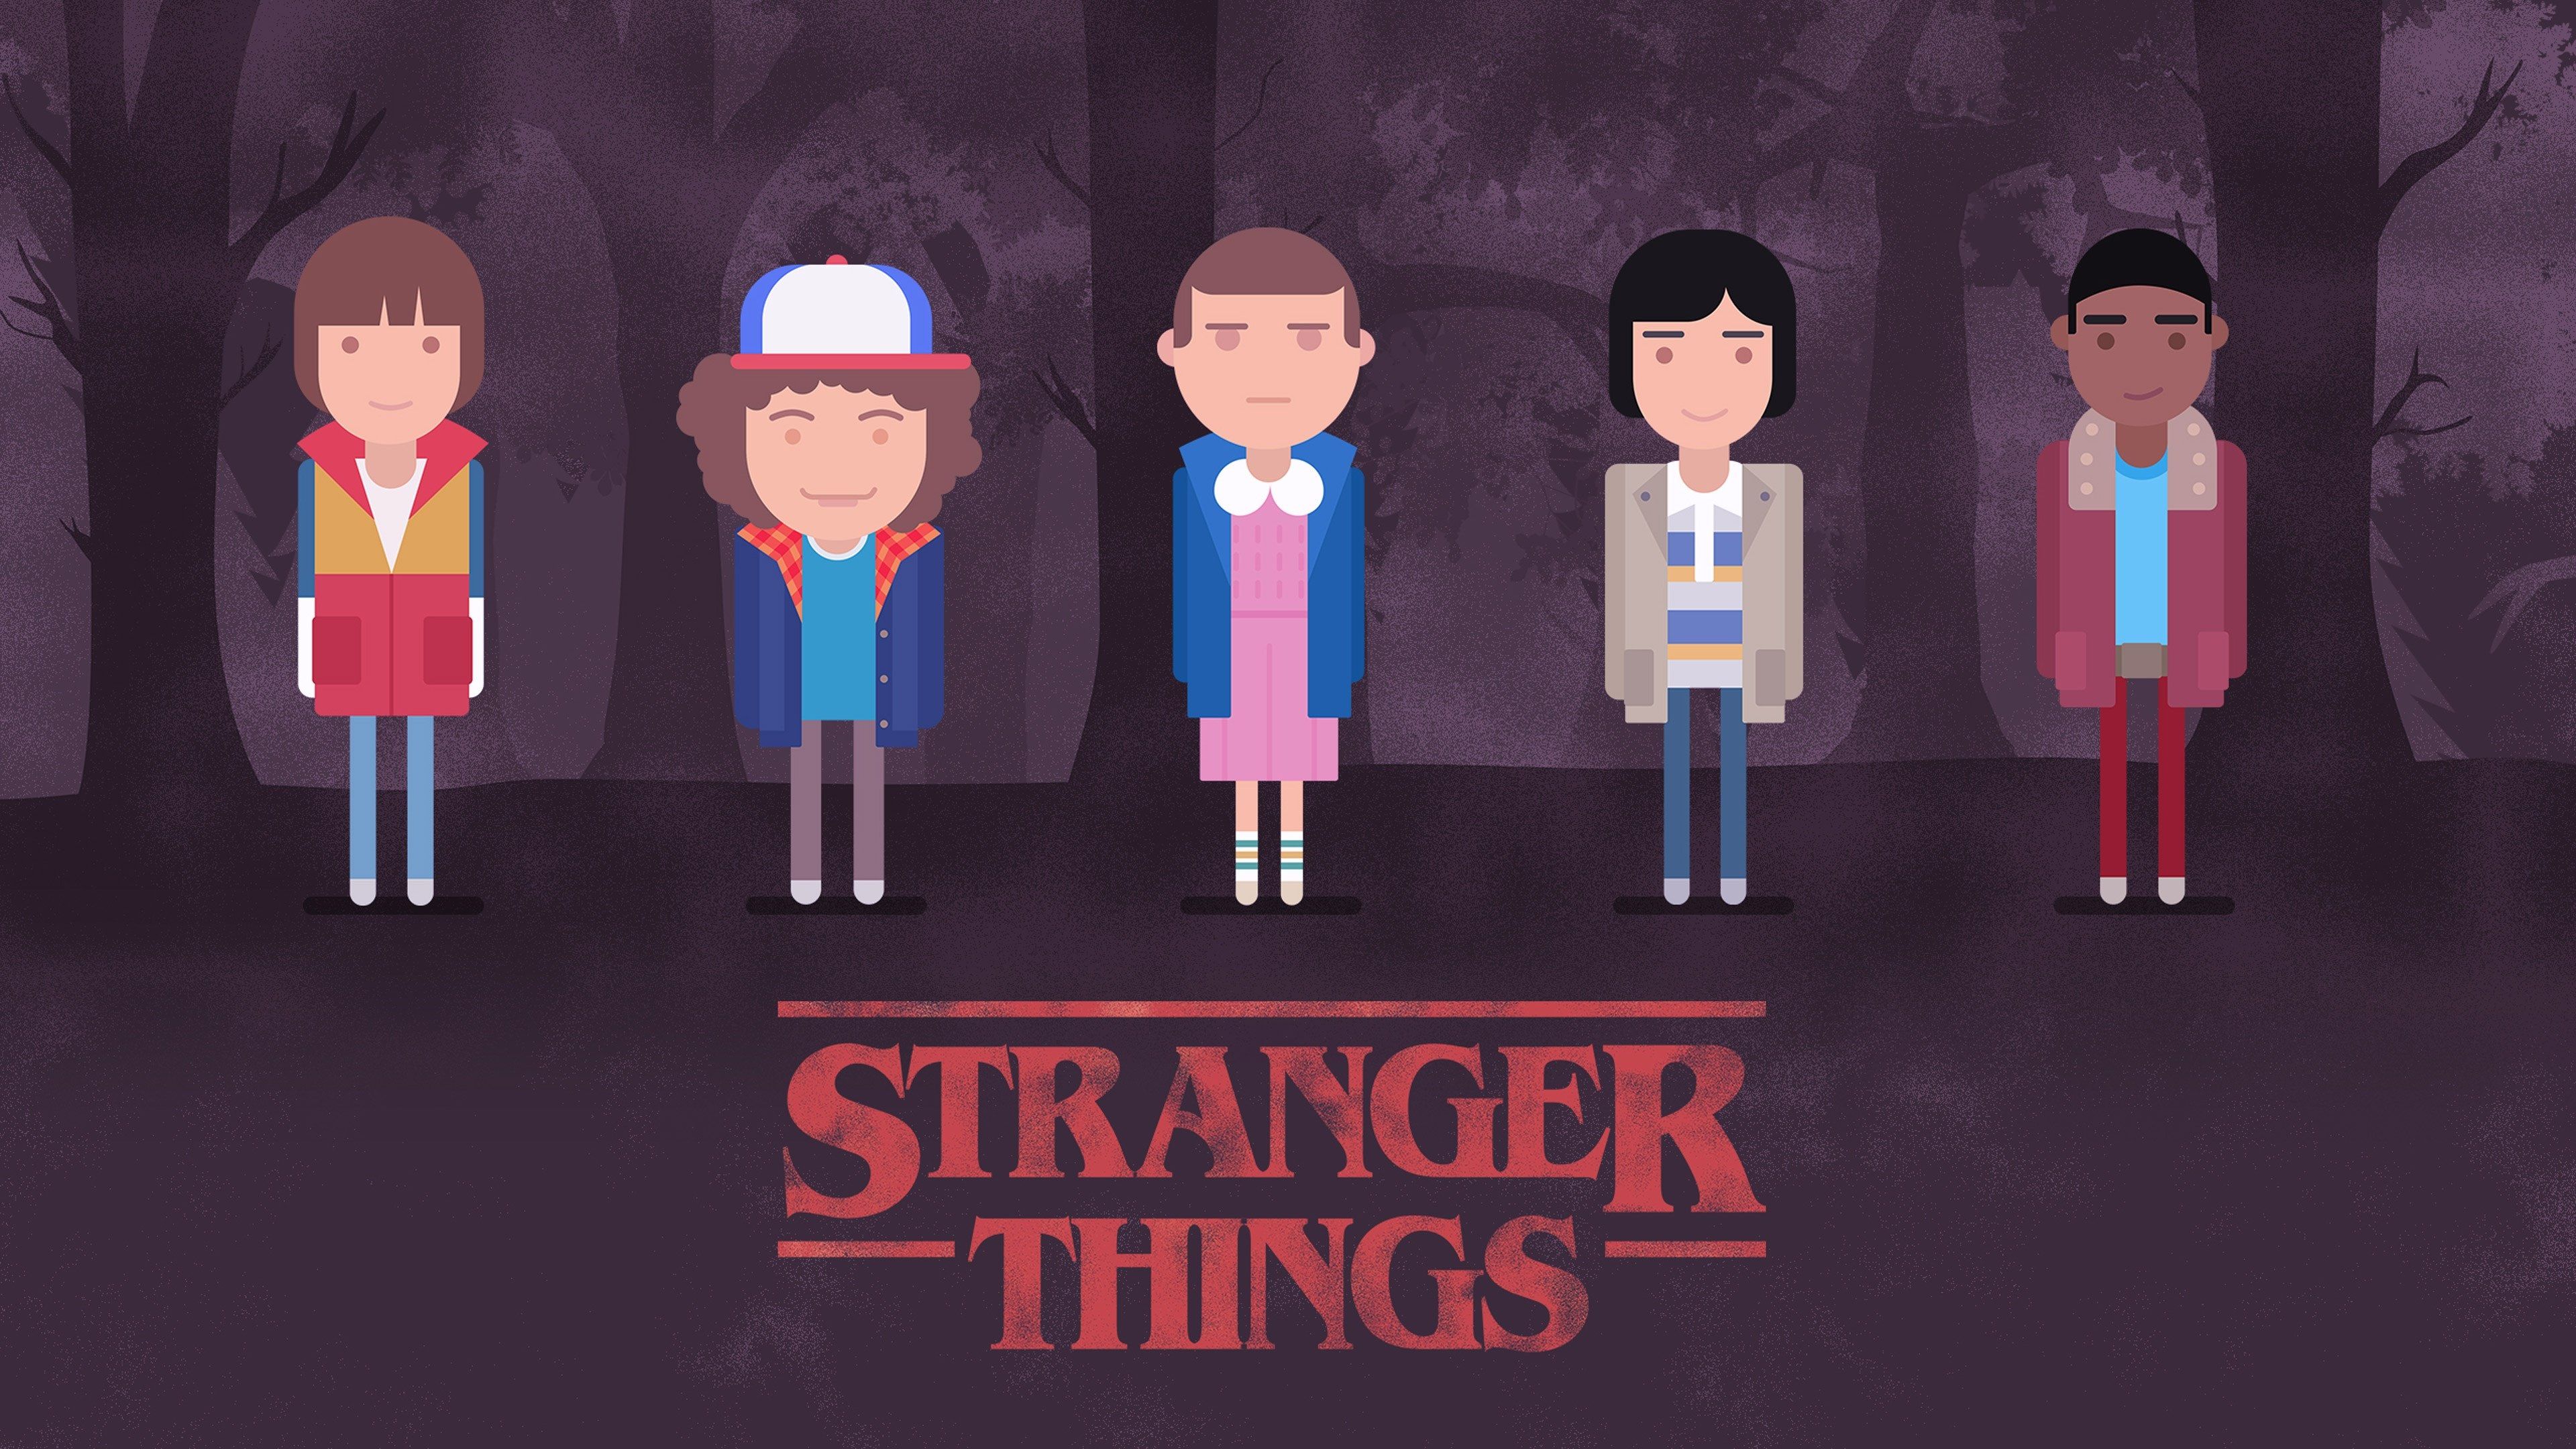 Computer Stranger Things Wallpapers - Wallpaper Cave